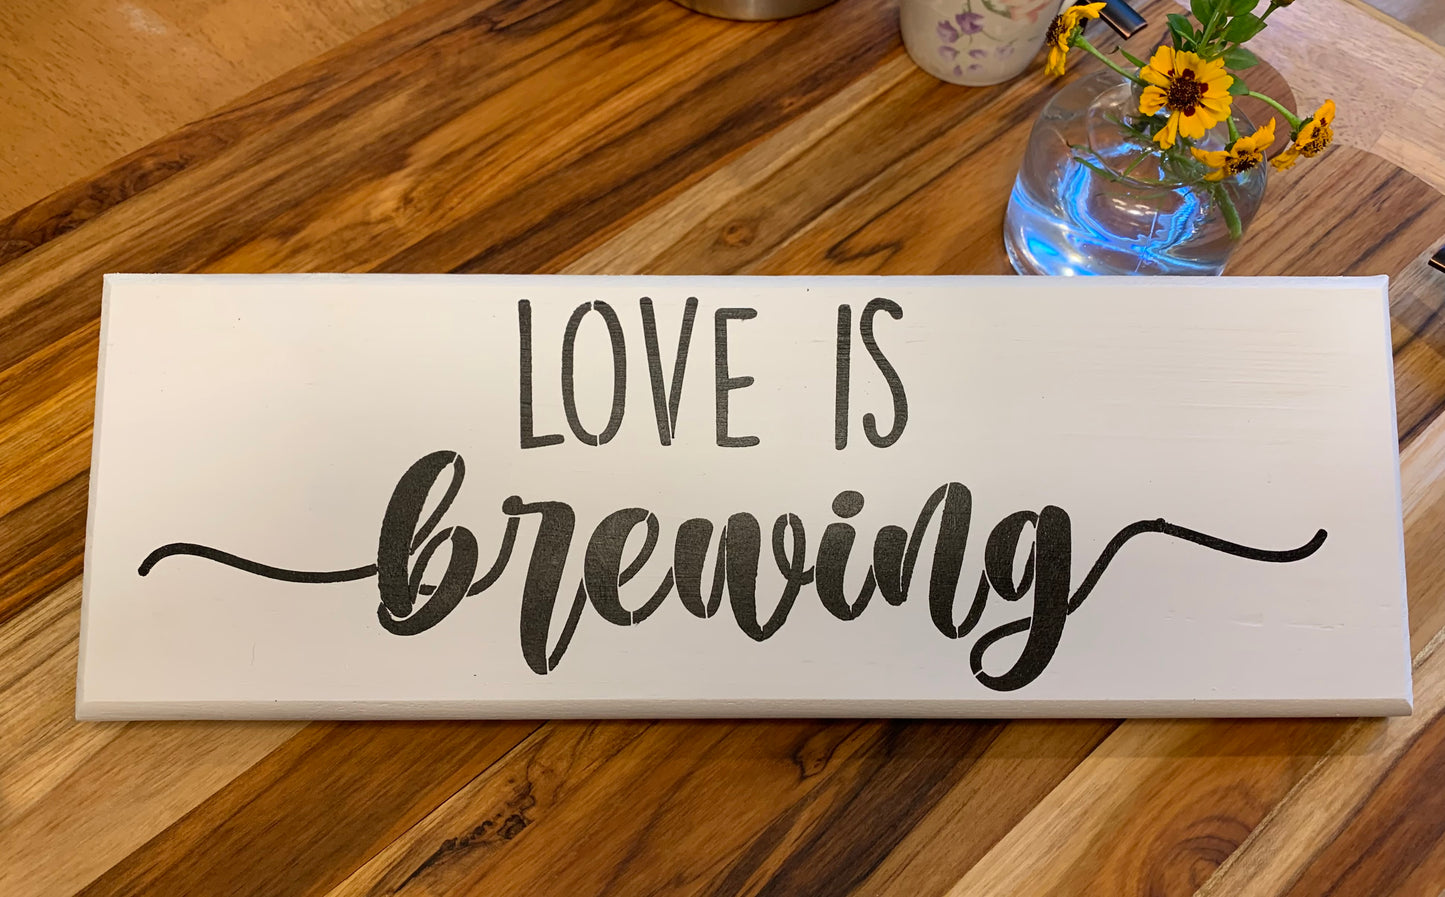 Love is brewing sign